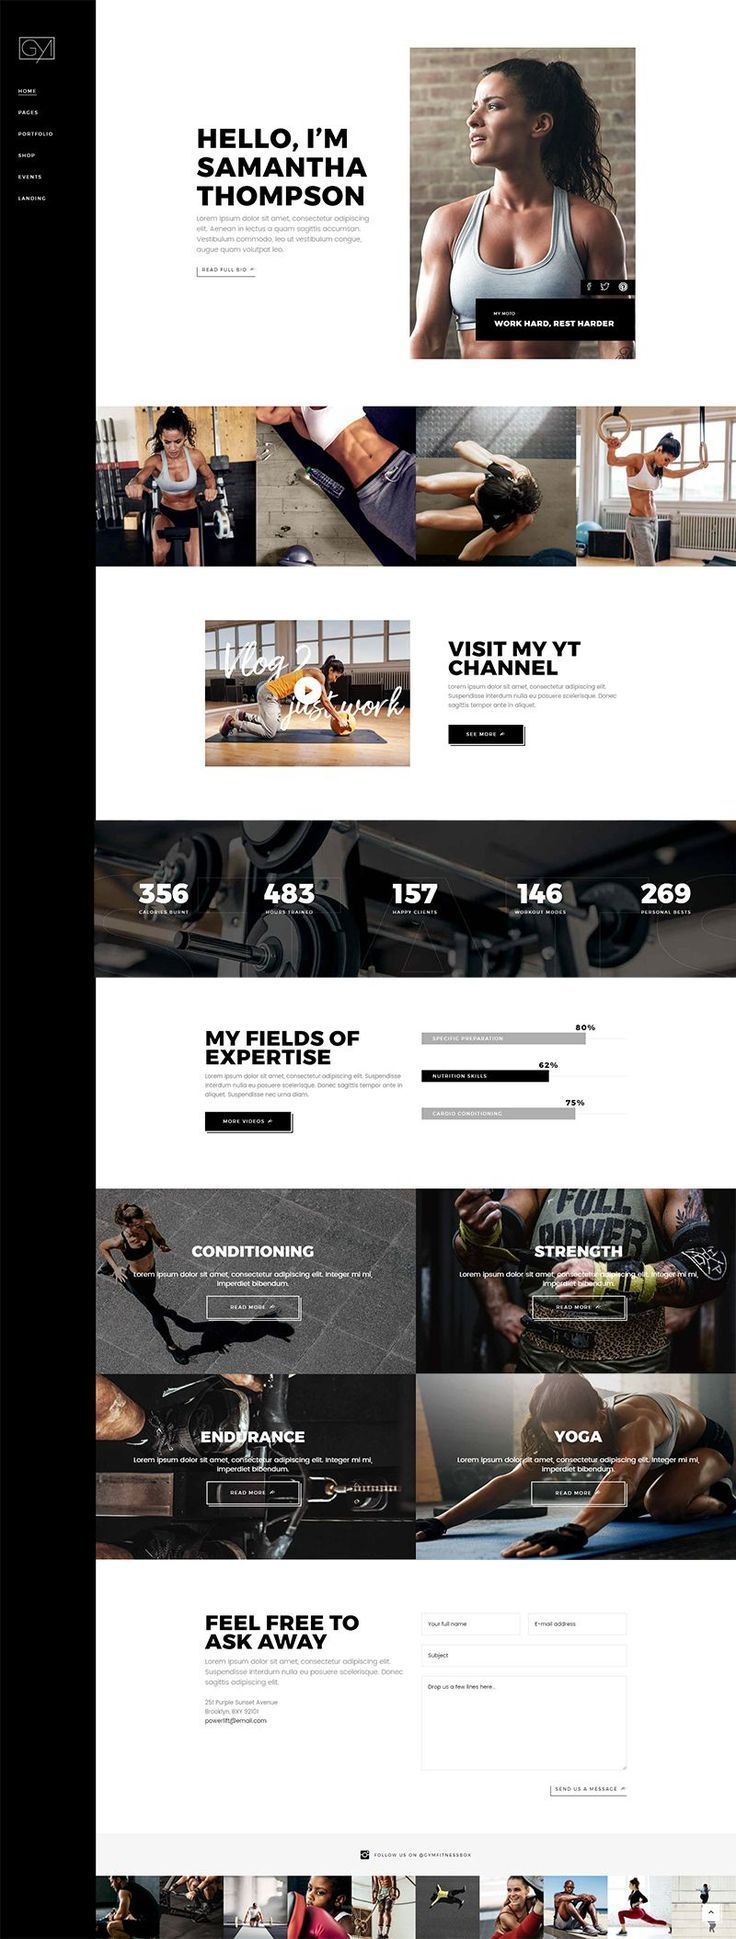 Powerlift - Fitness and Gym Theme -   fitness Design website